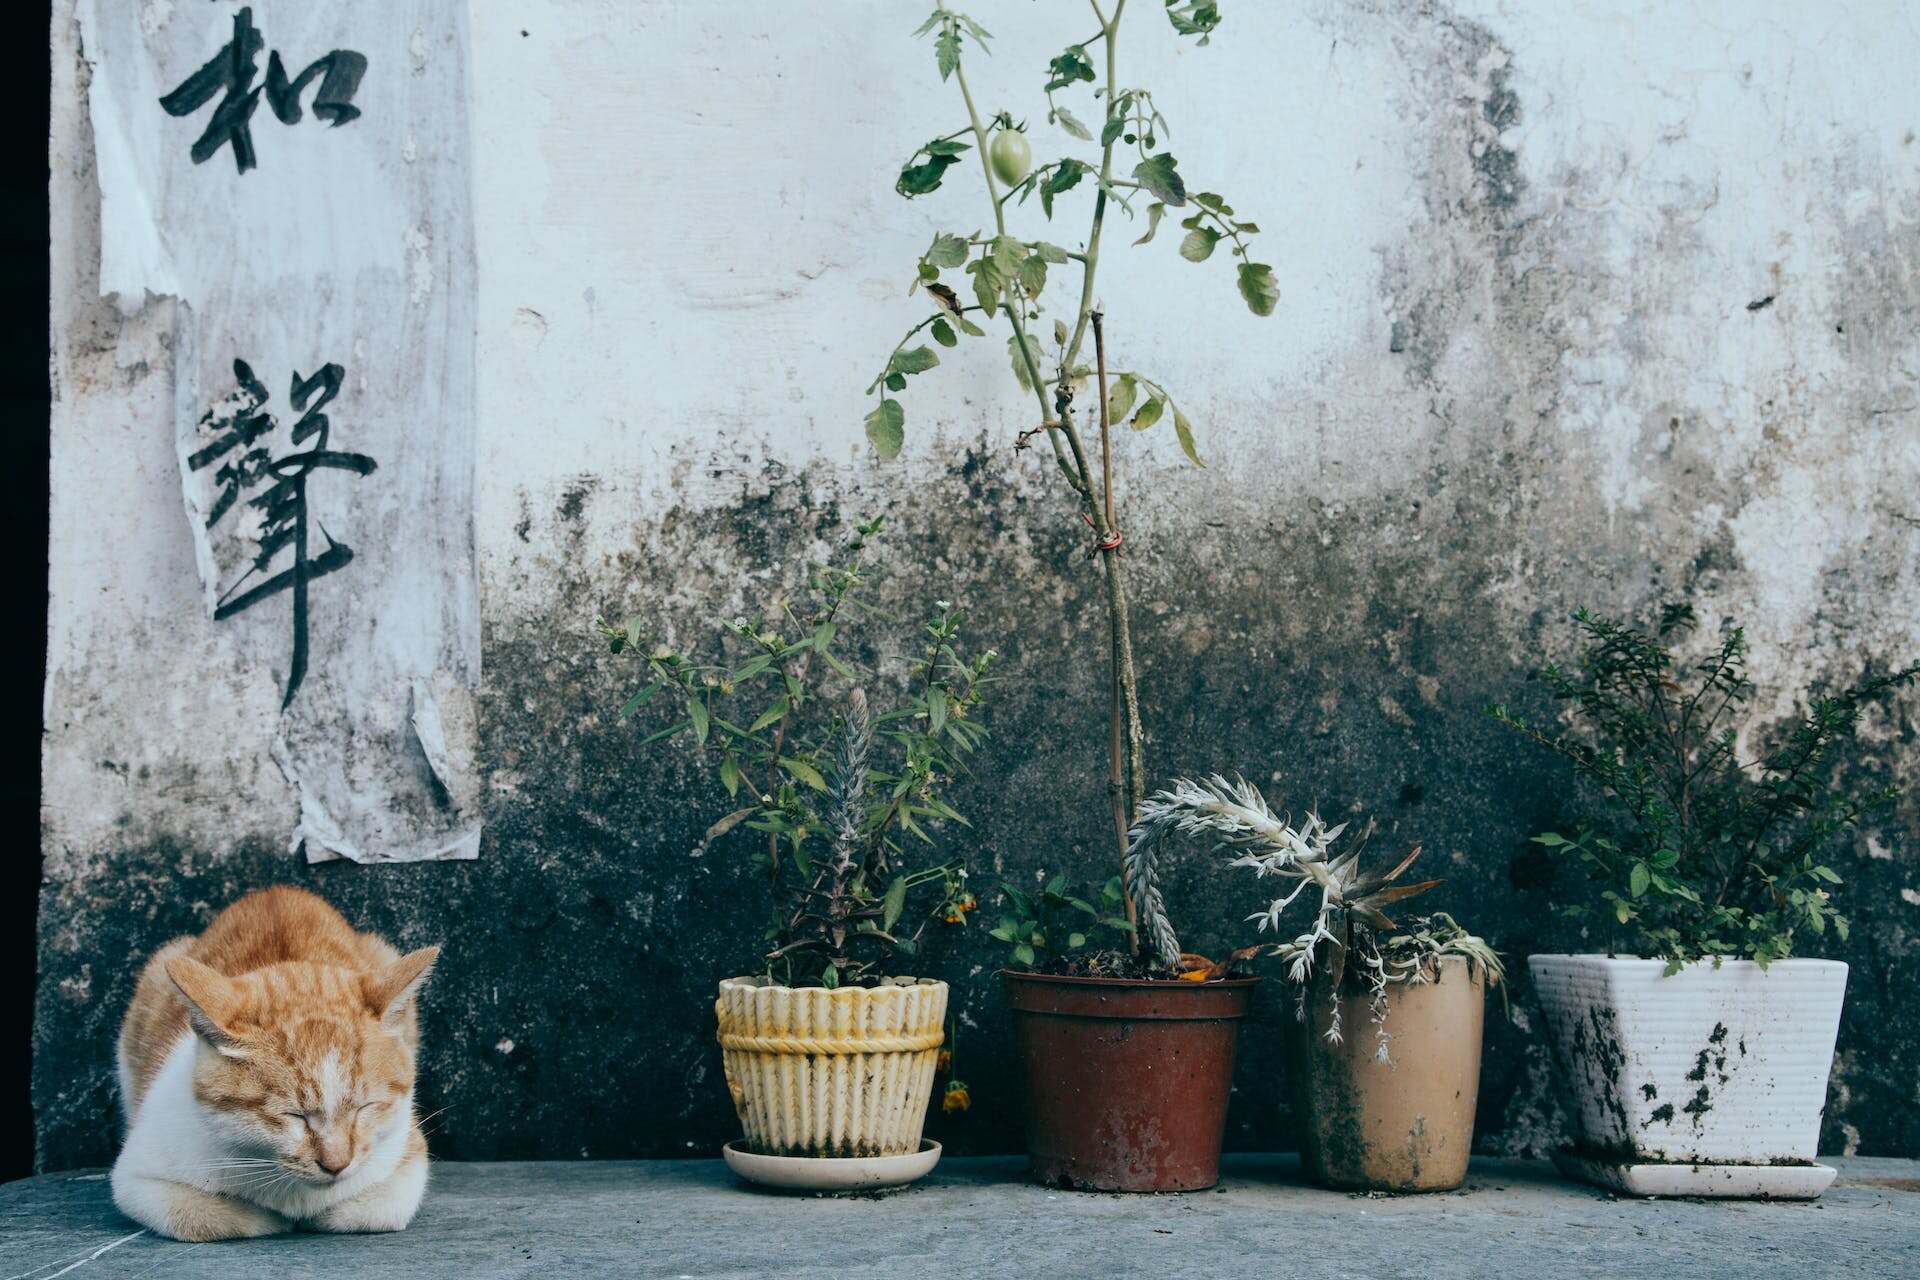 A senior cat sitting outdoors next to potted plants